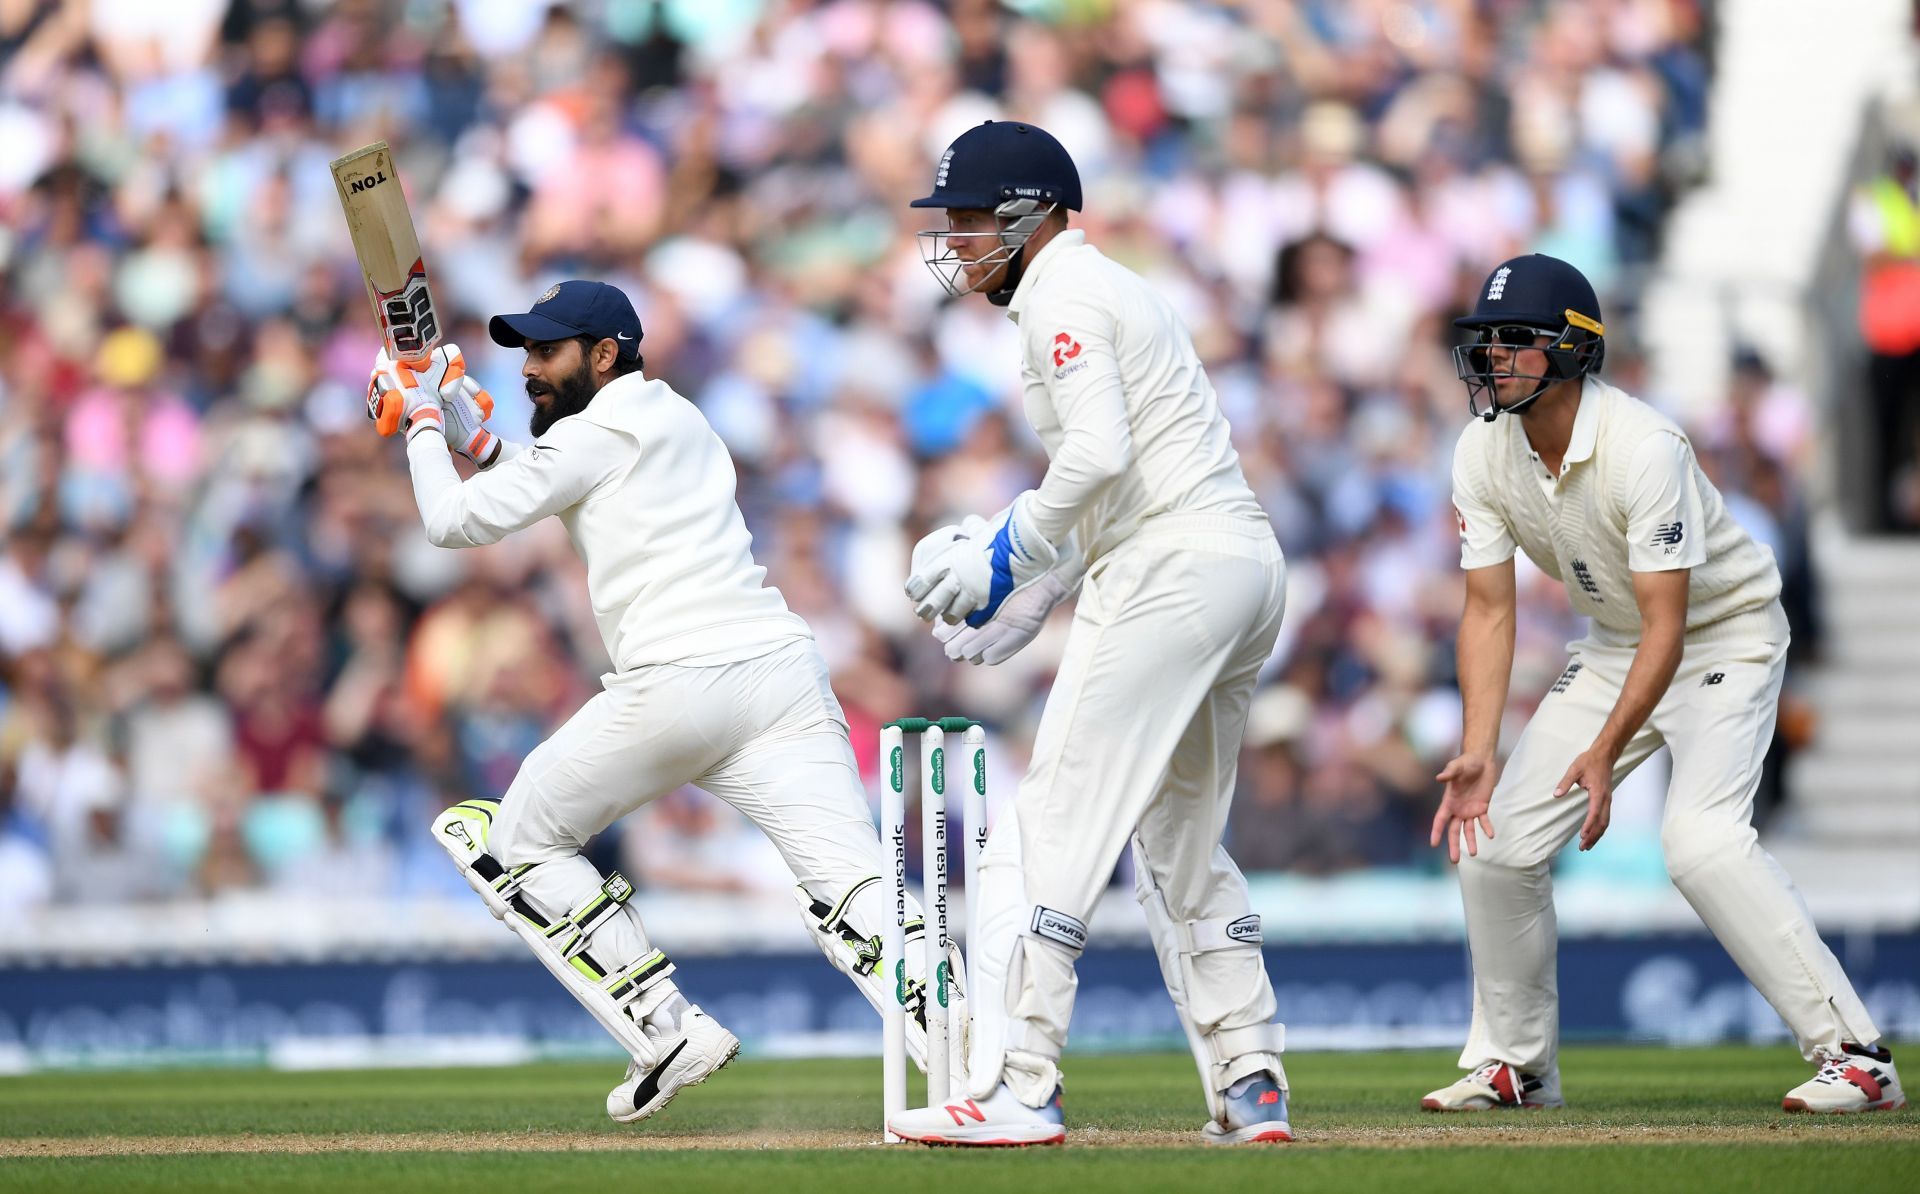 Ravindra Jadeja during the 2018 Test at The Oval where he played an impressive knock